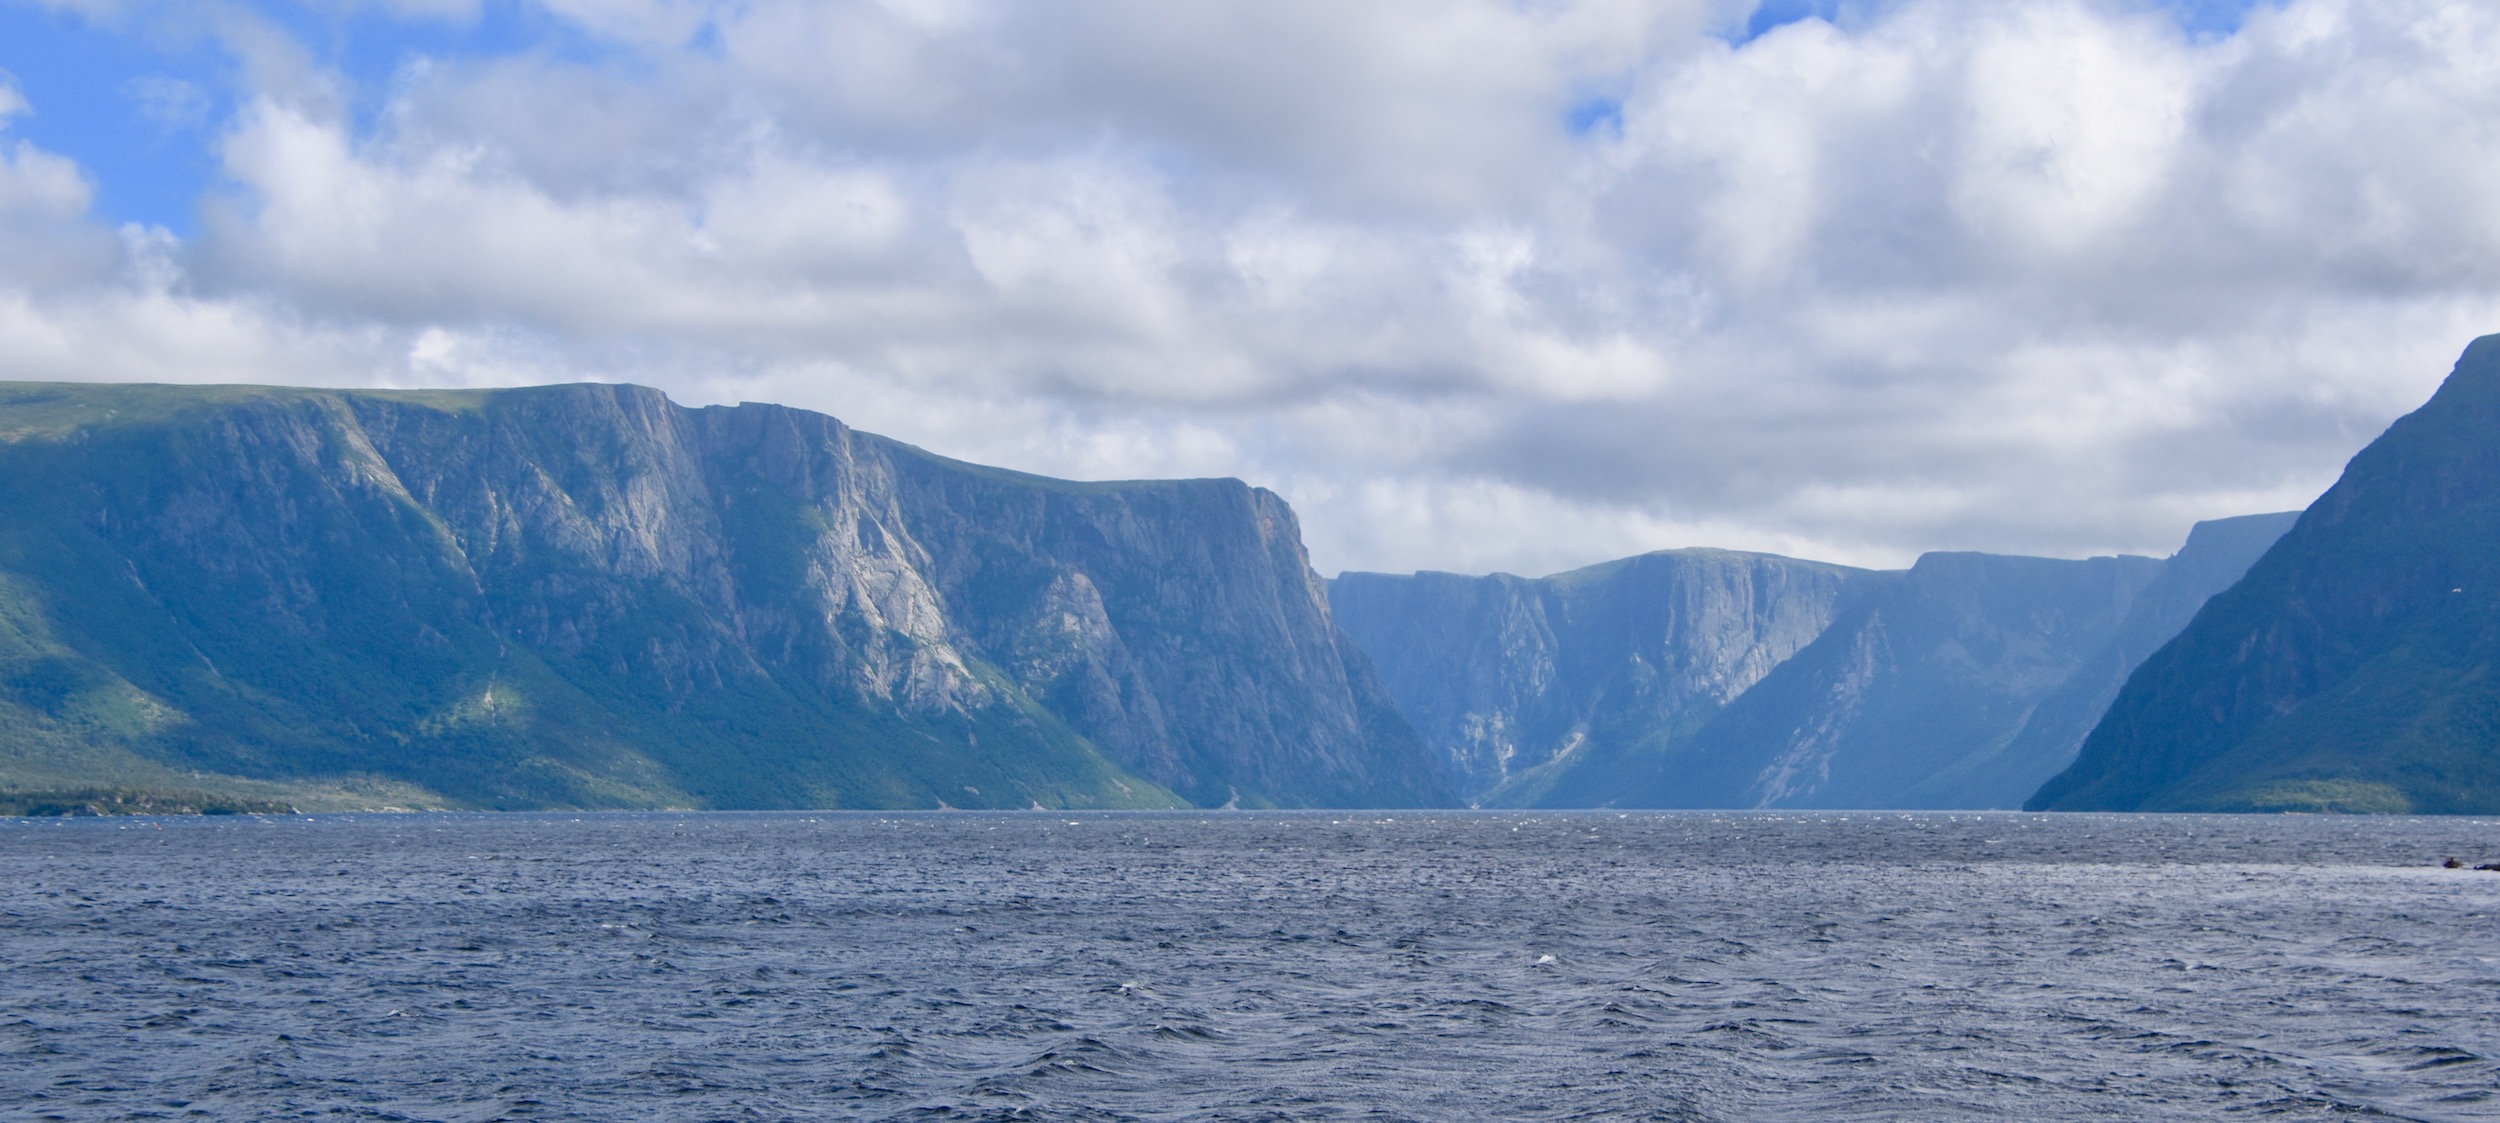  Starting Out on WEstern Brook Pond